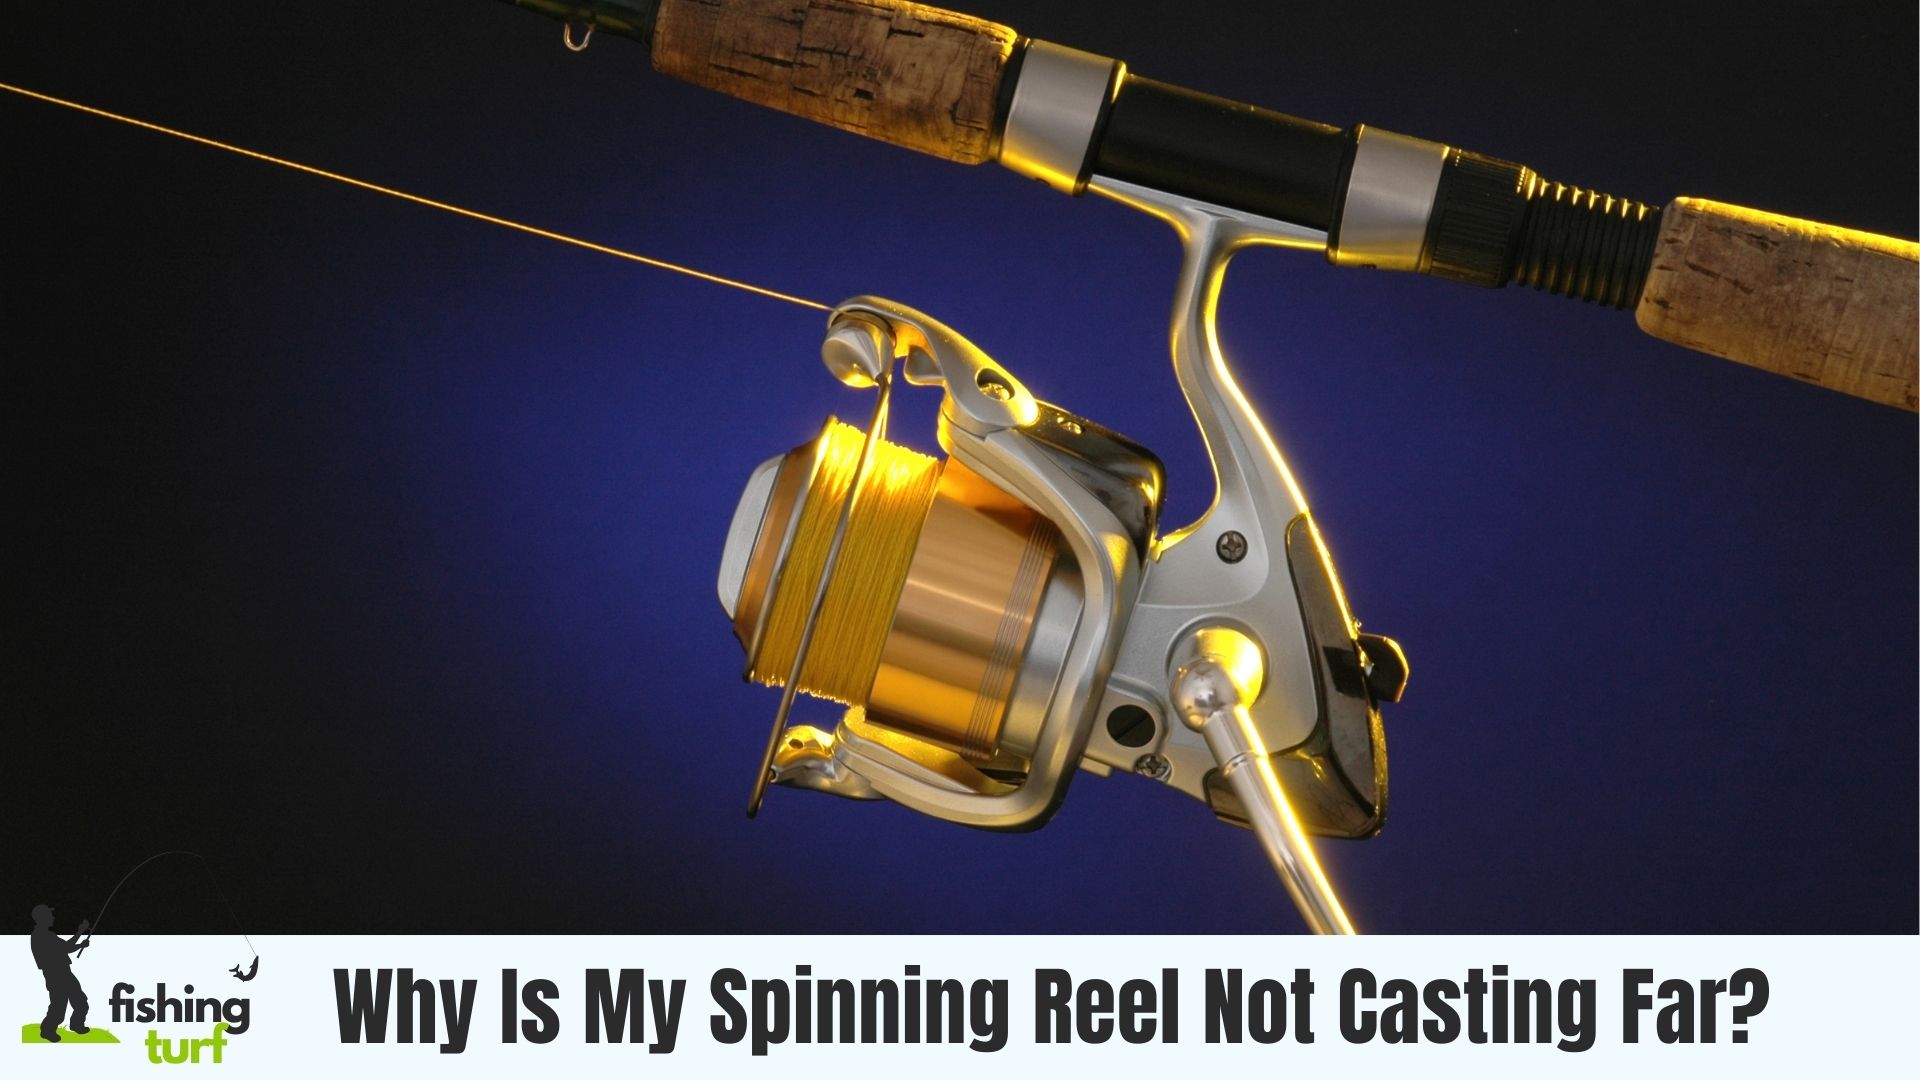 Why Is My Spinning Reel Not Casting Far